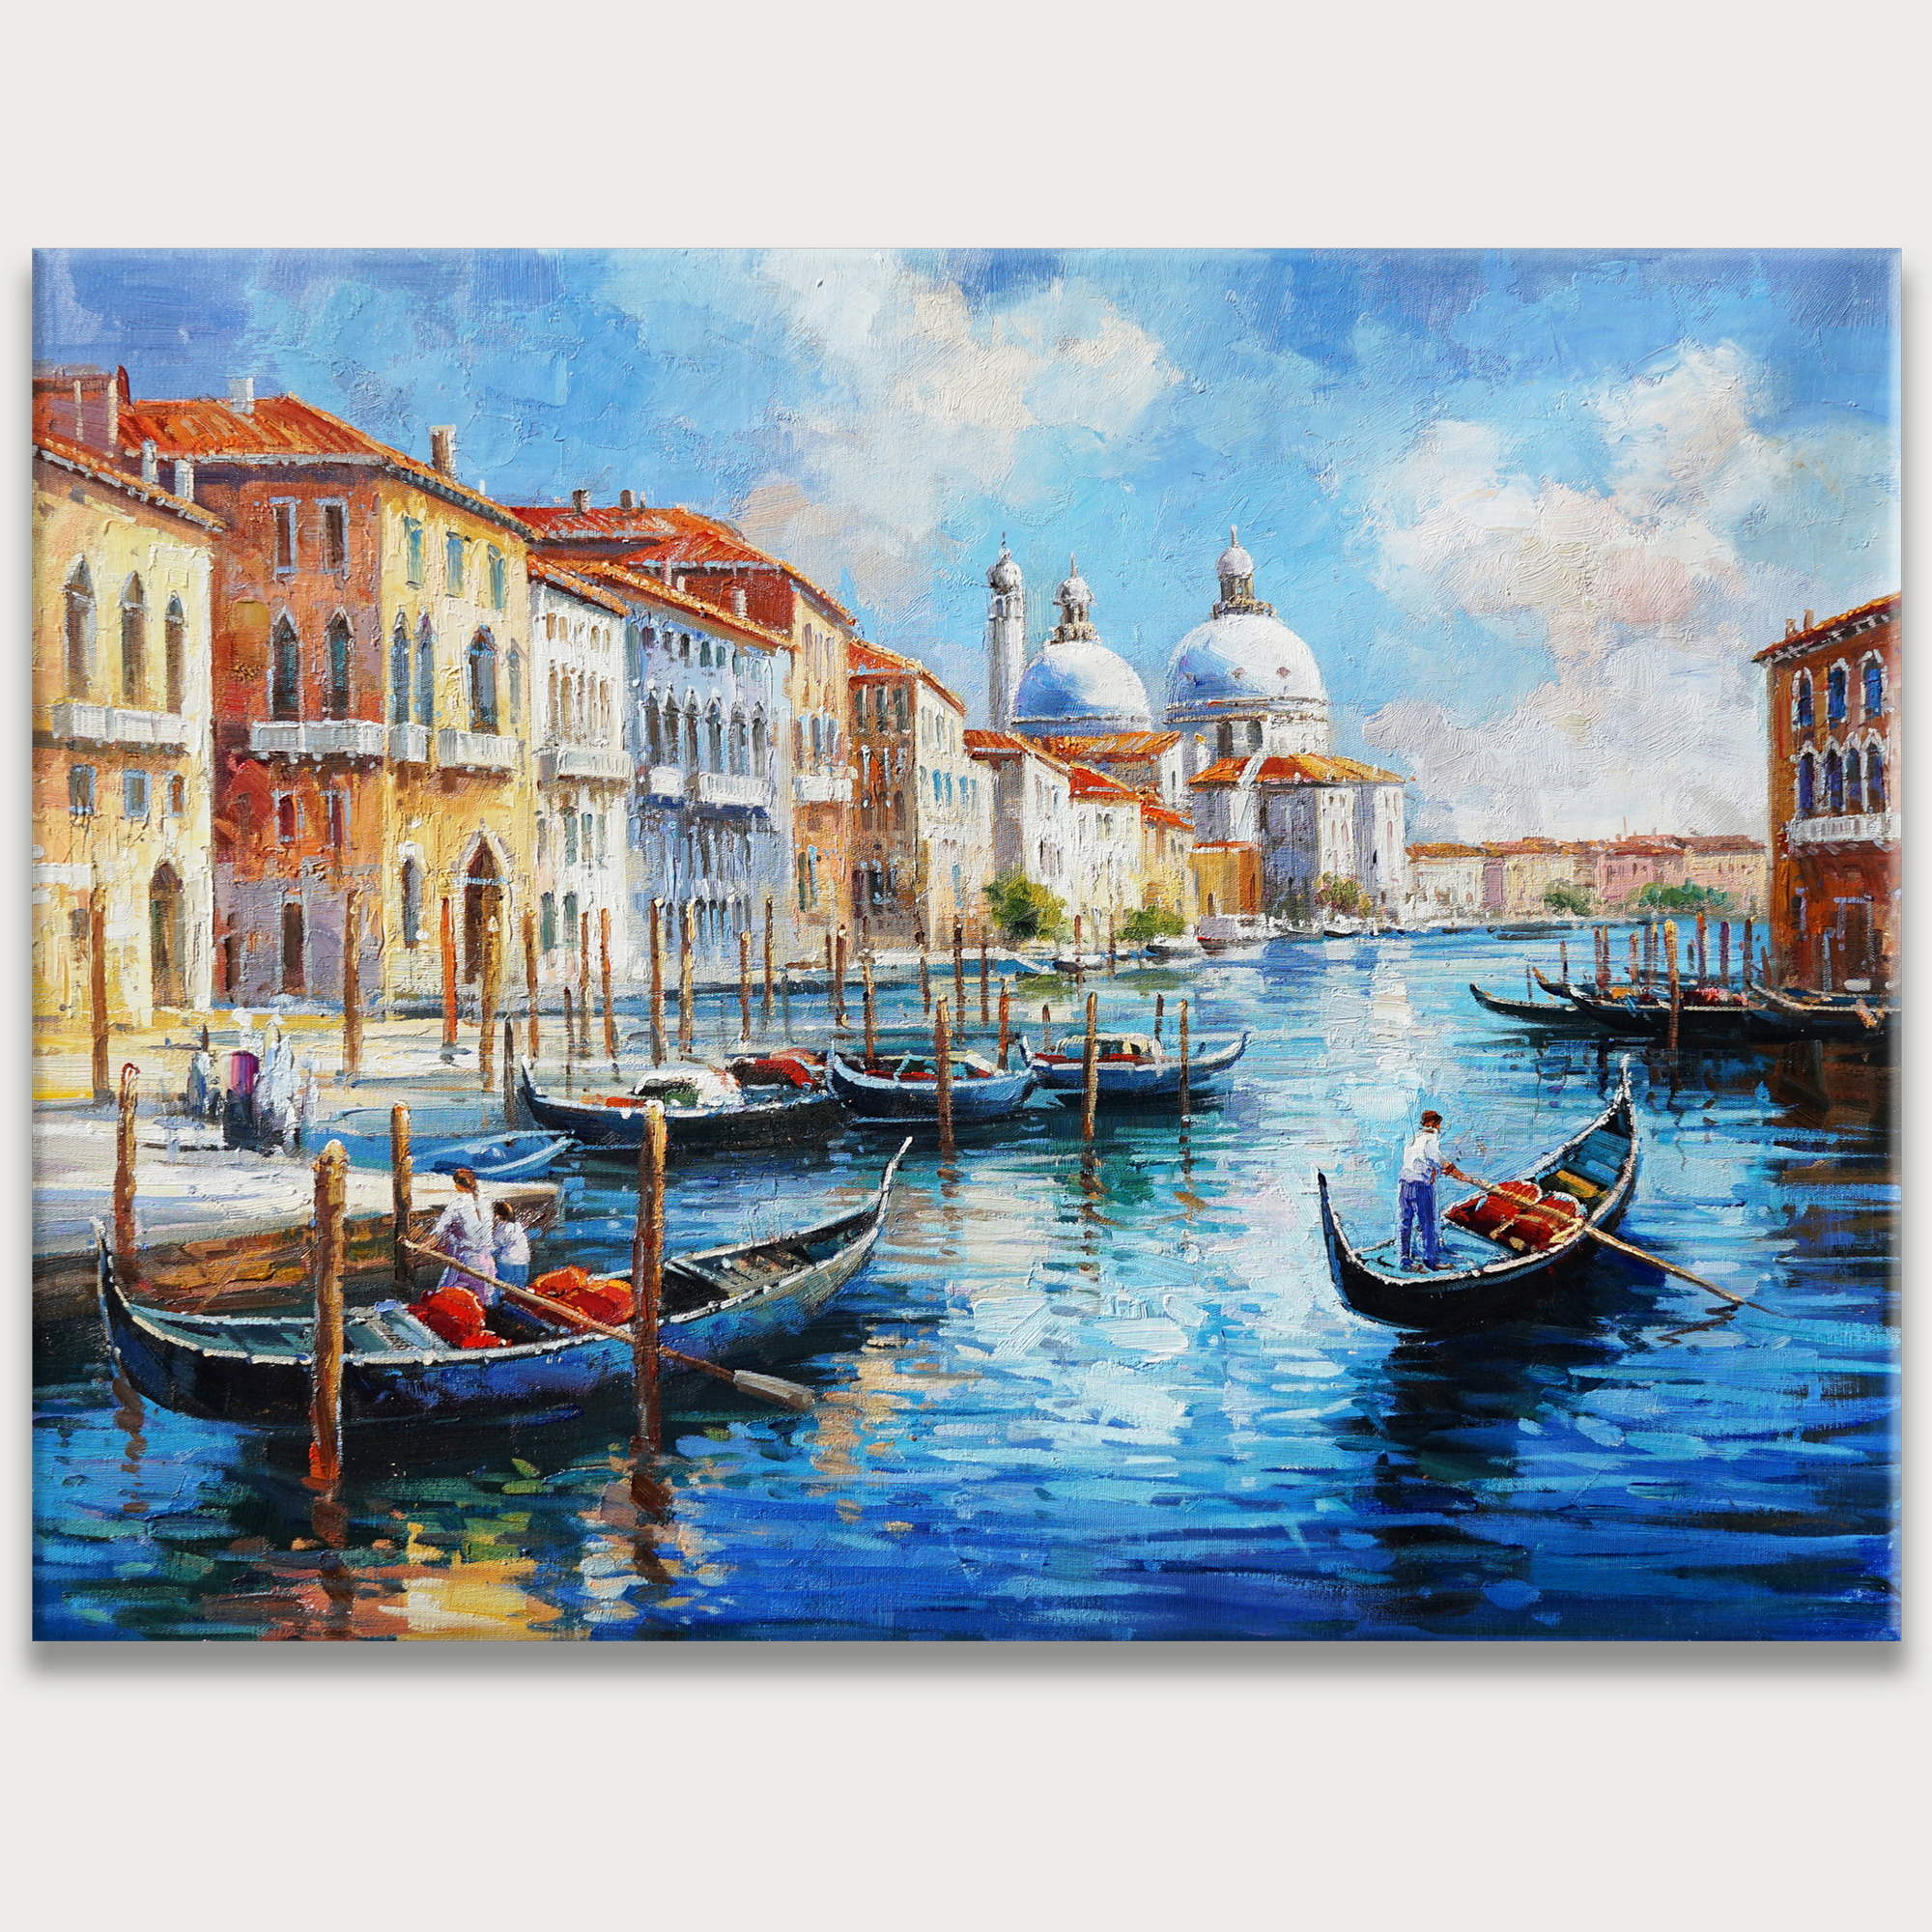 Hand painted View of Venice Canal Gondolas 75x100cm